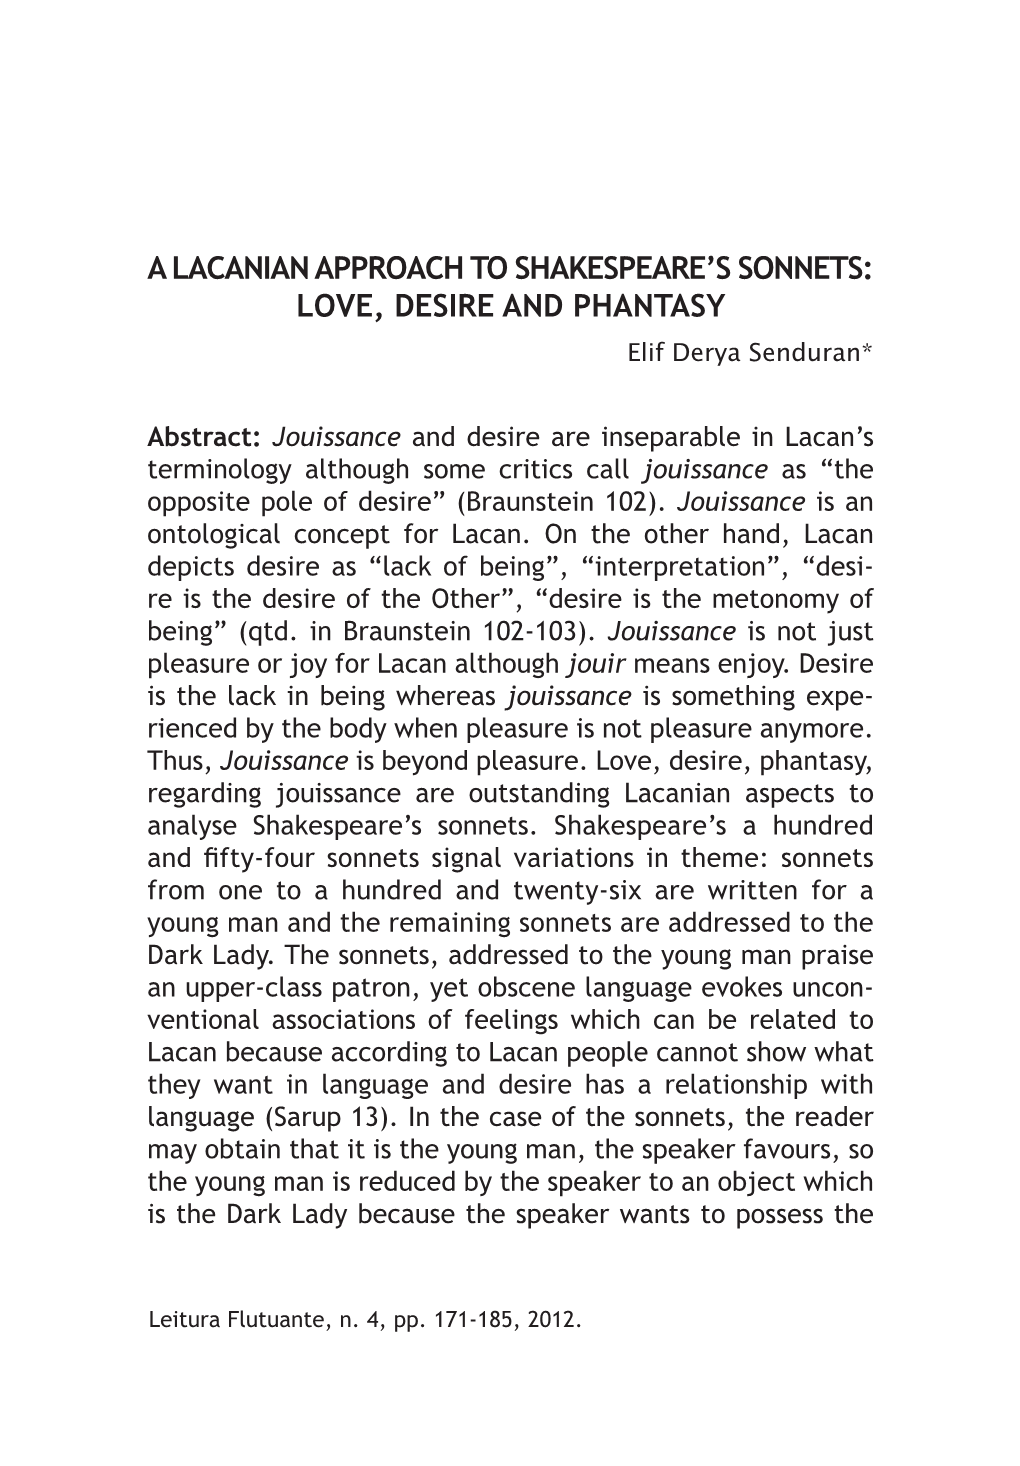 A Lacanian Approach to Shakespeare's Sonnets